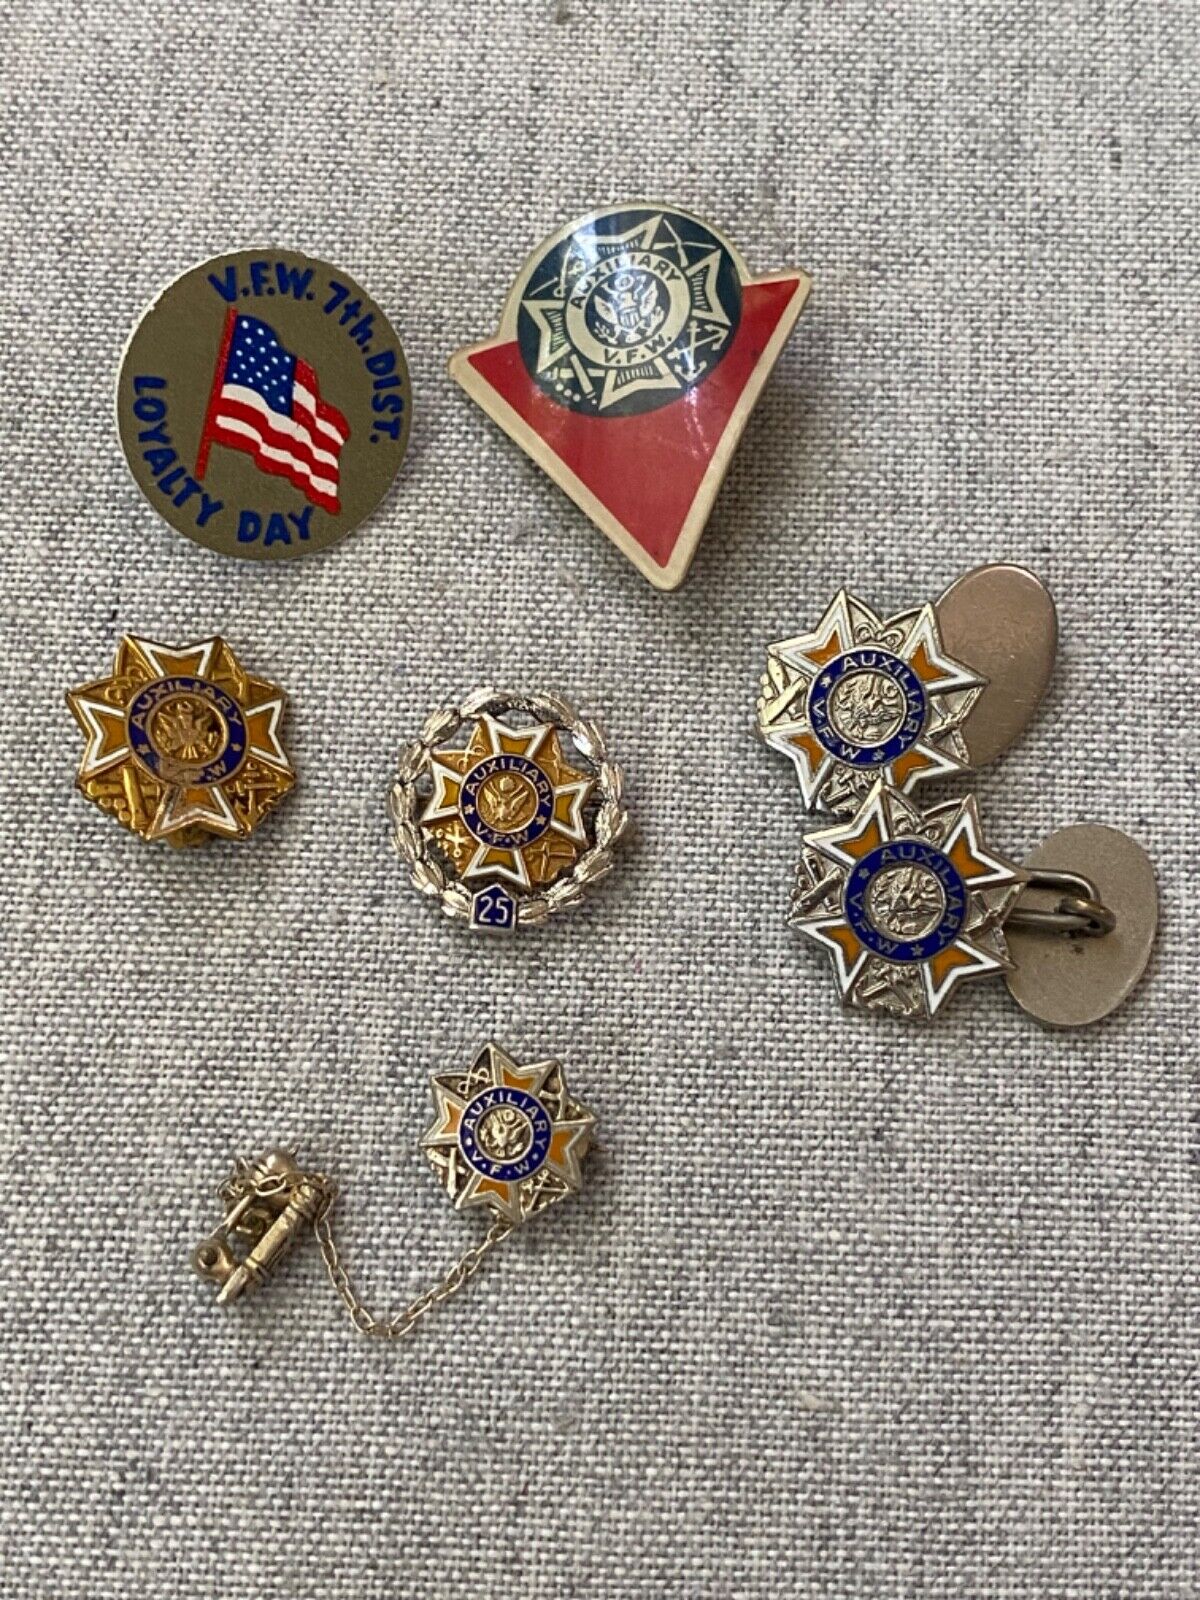 Vintage V.F.W. VFW Auxiliary Pin & Cufflinks Lot One is 10K Gold & Sterling